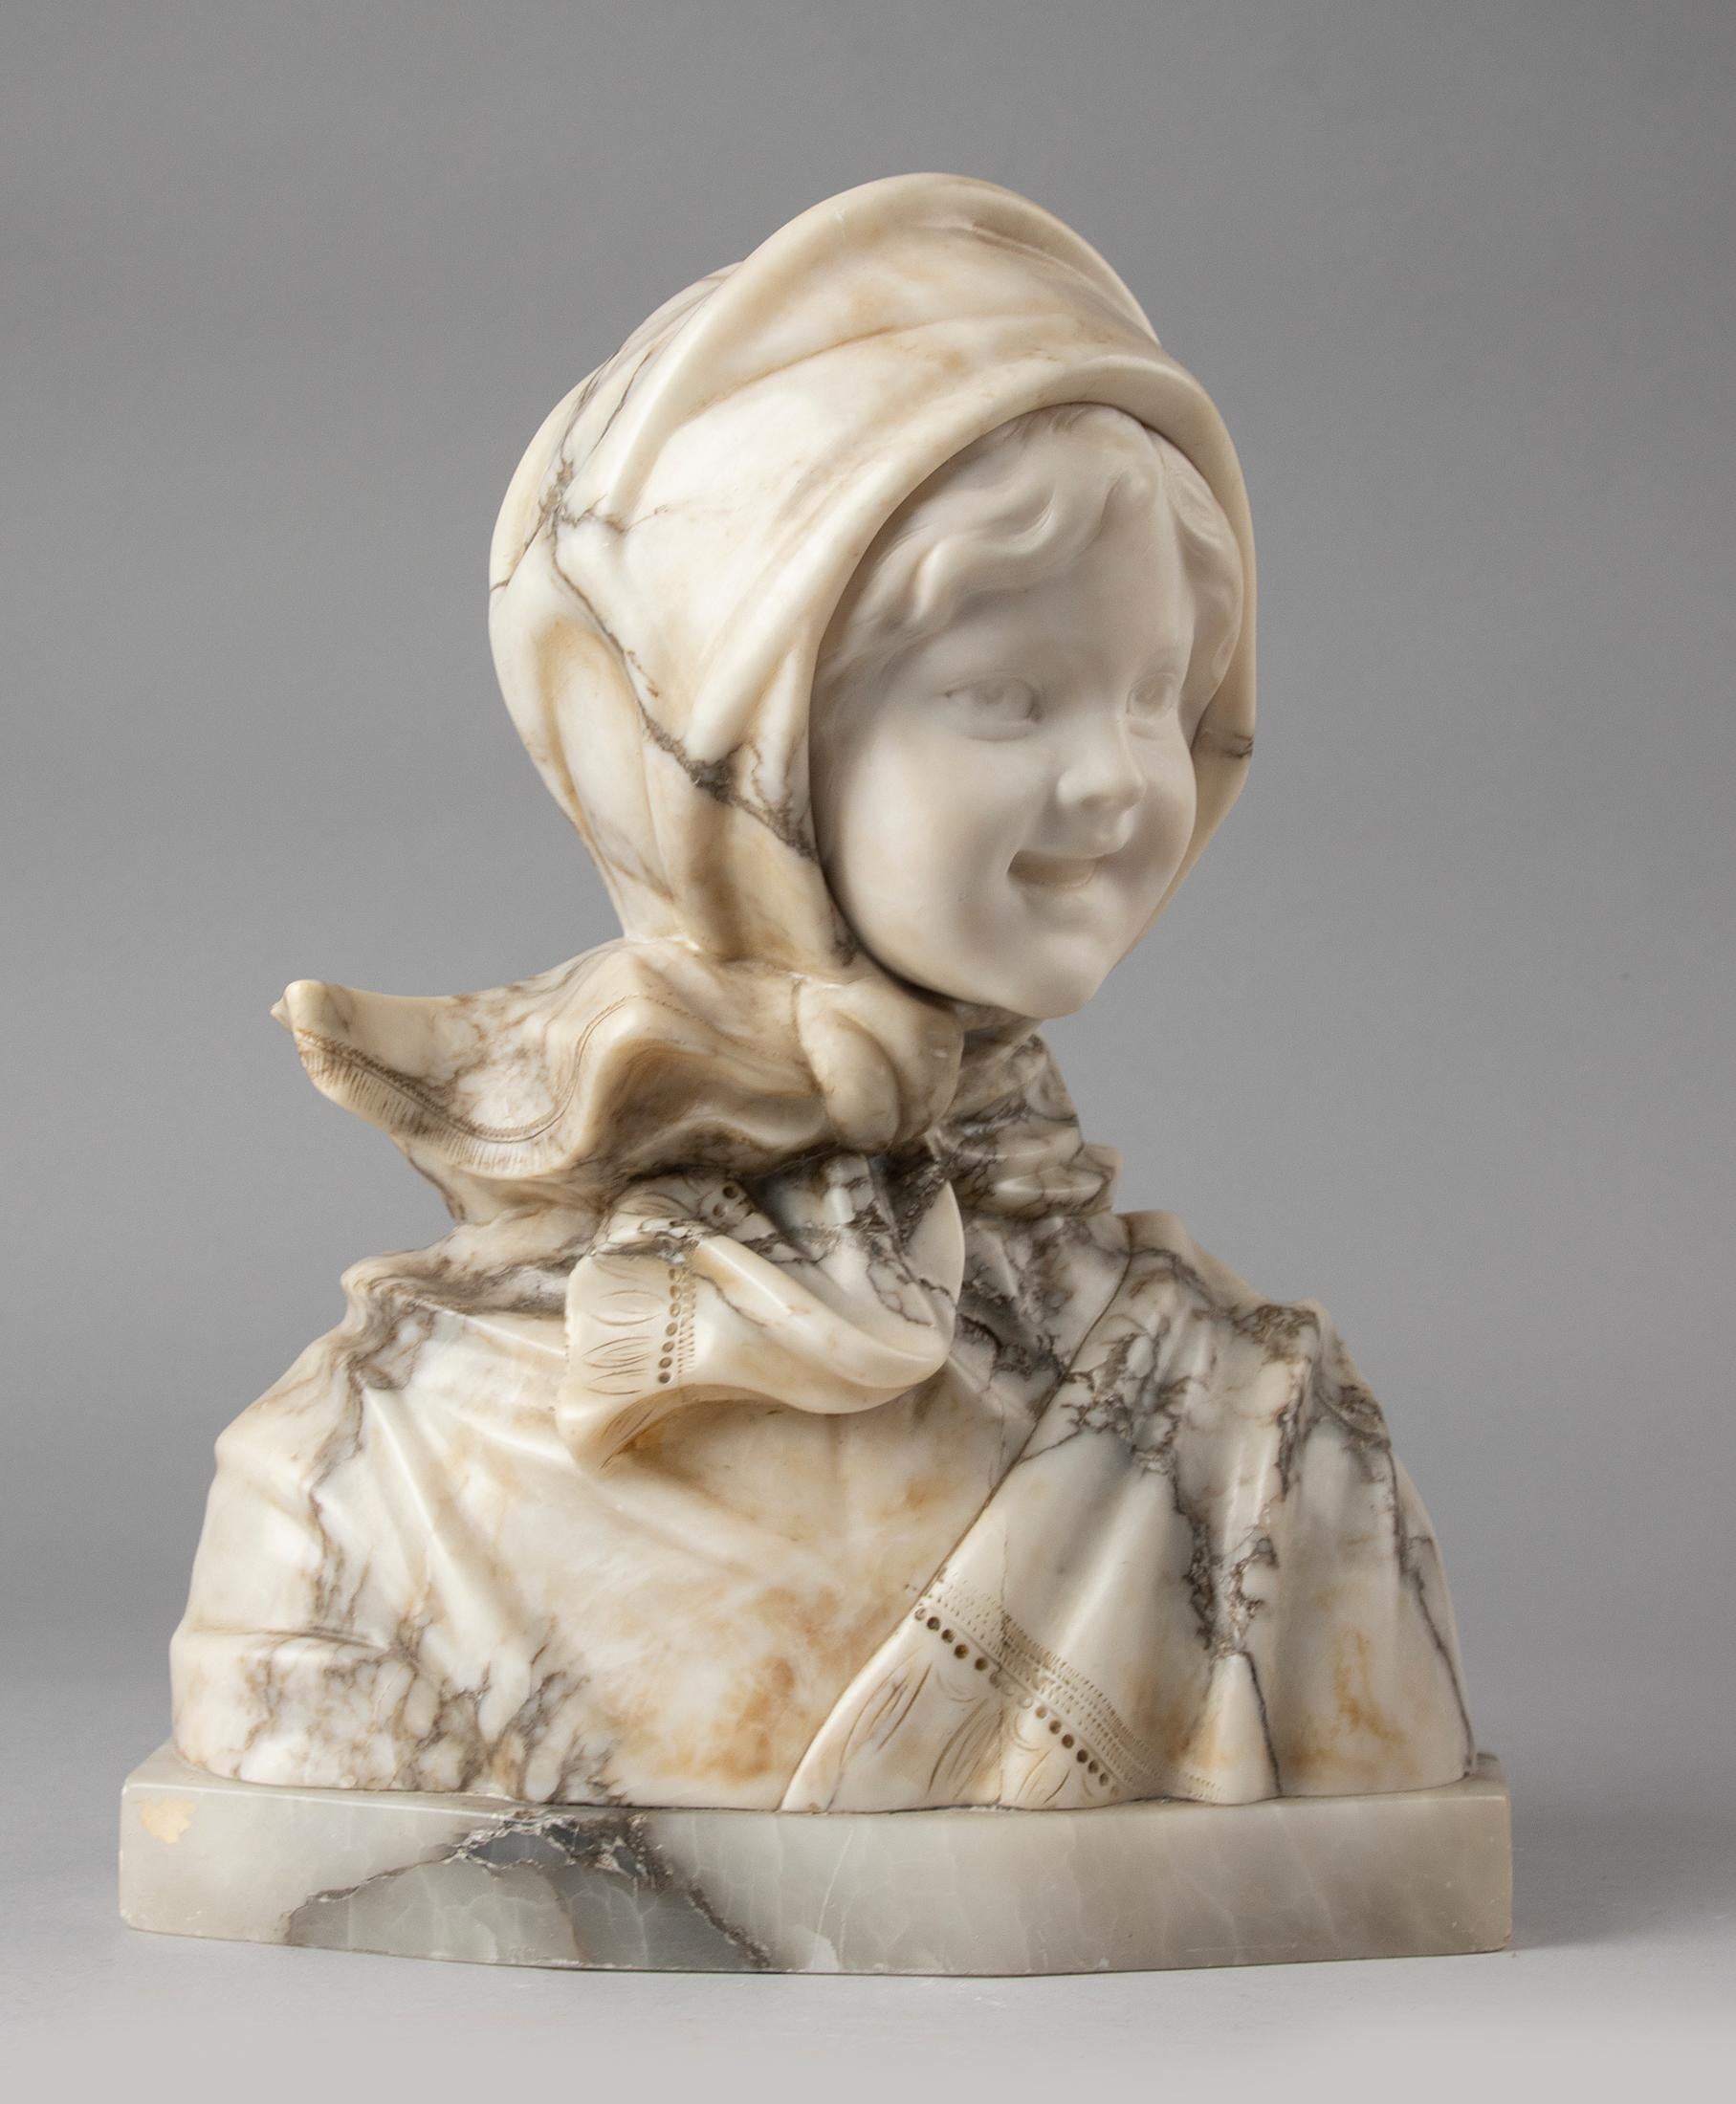 A fine and elegant French alabaster bust of a young woman. The bust is signed on the back M. POTEILLO. The woman wears a headscarf that is gracefully sculpted. The wind is blowing through the ends of the scarf. Her face is made of alabaster marble.